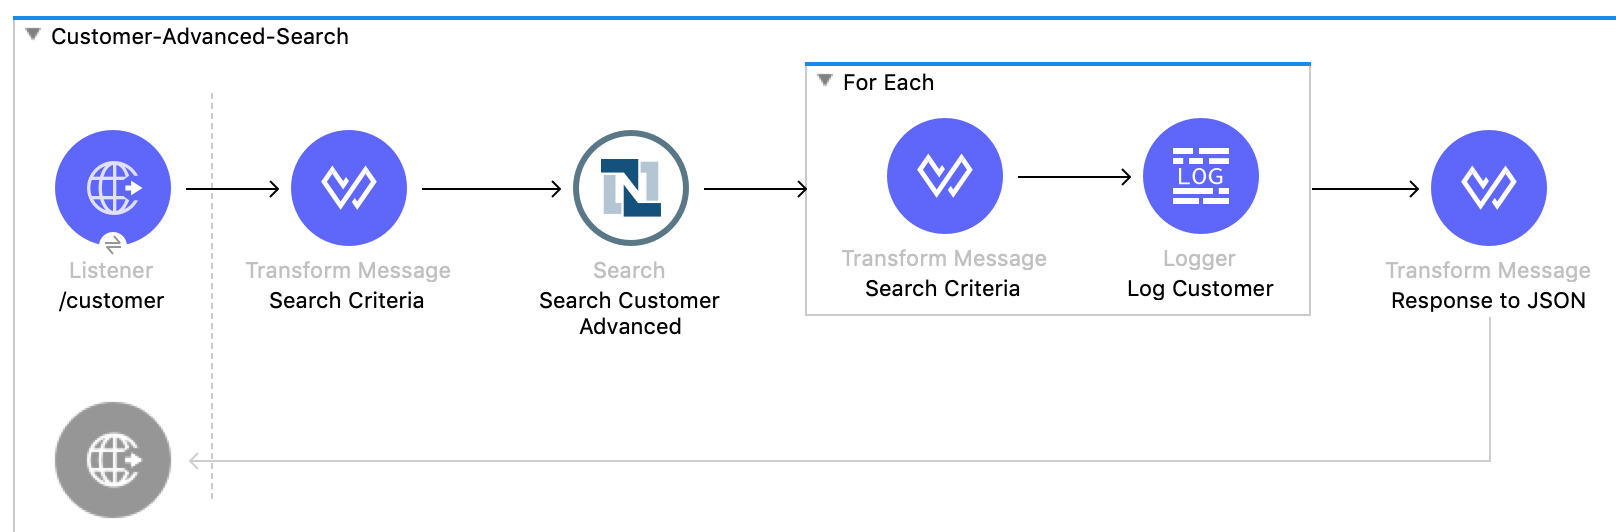 App flow for the Customer advanced search example